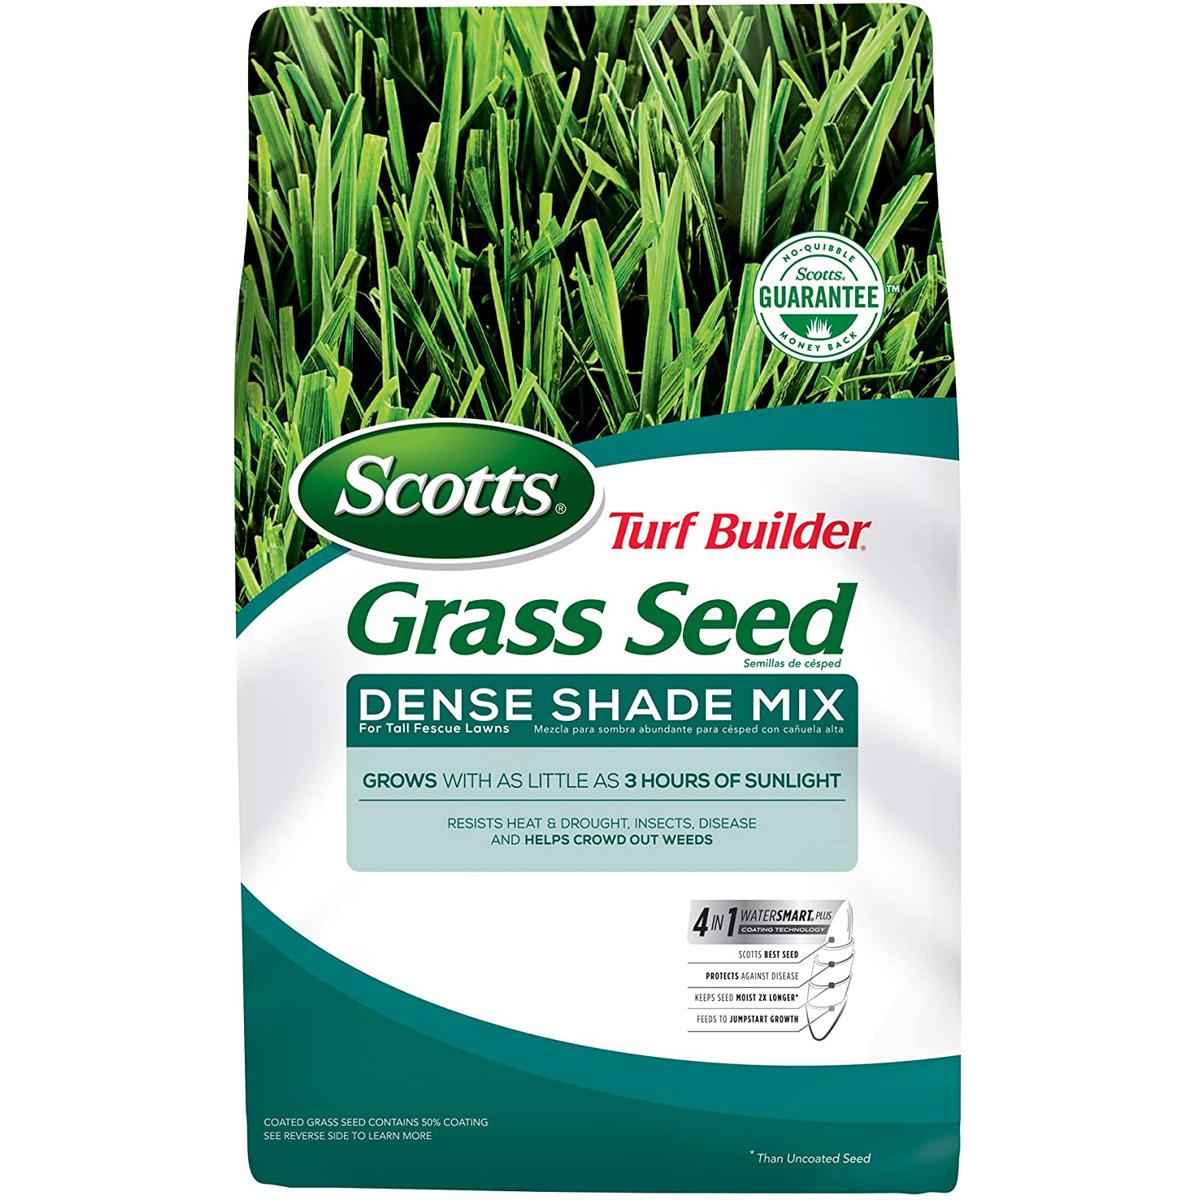 7lb Scotts Turf Builder Dense Shade Mix Grass Seed for $17.19 Shipped